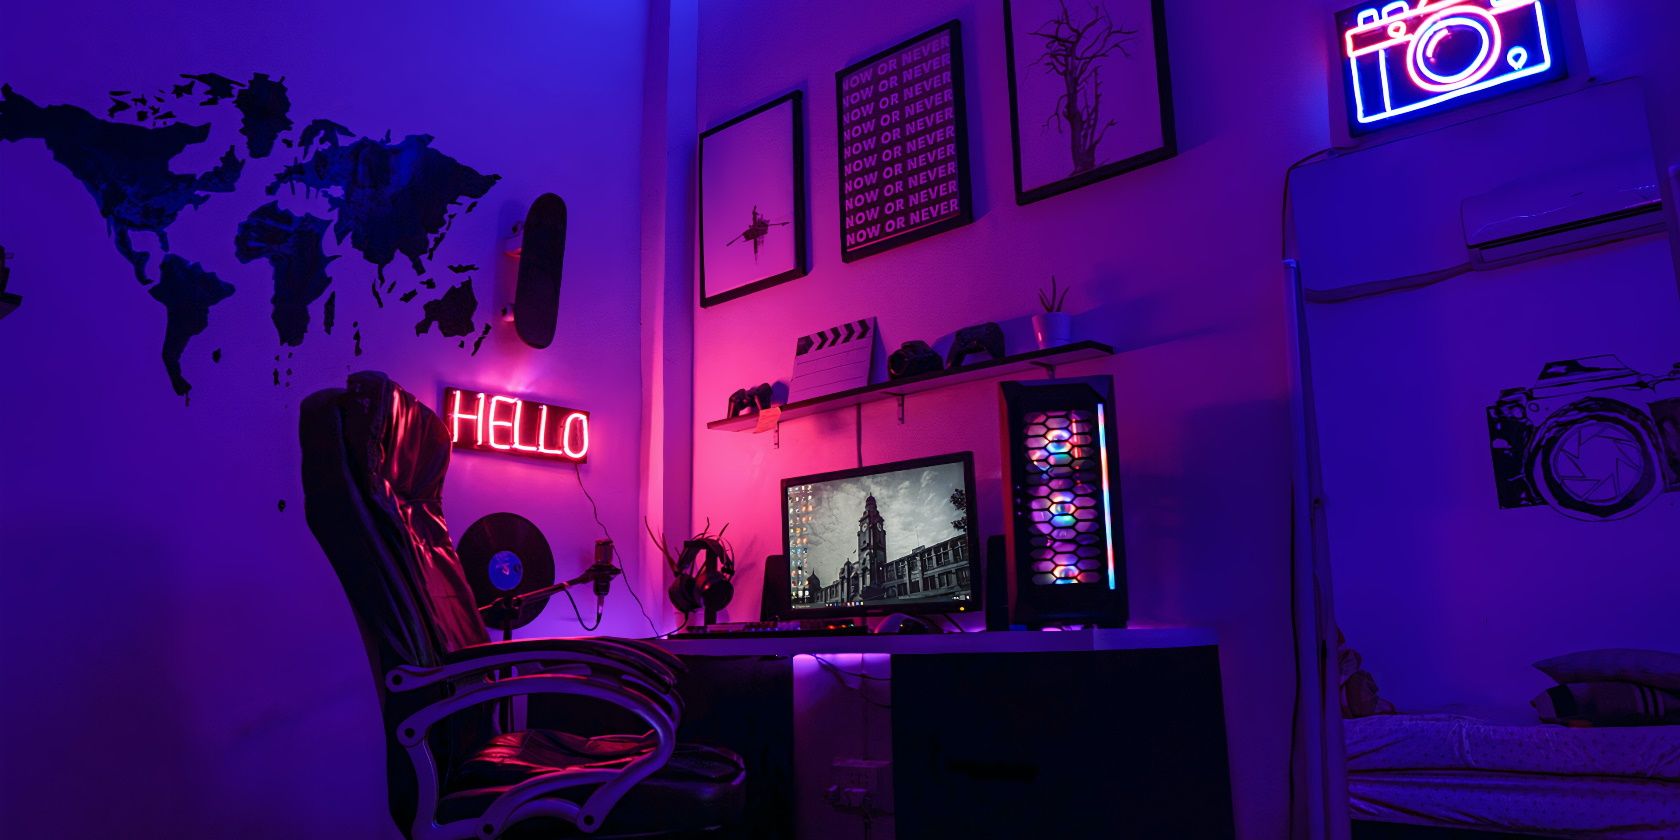 Computer and chair in a room covered in blue and purple light